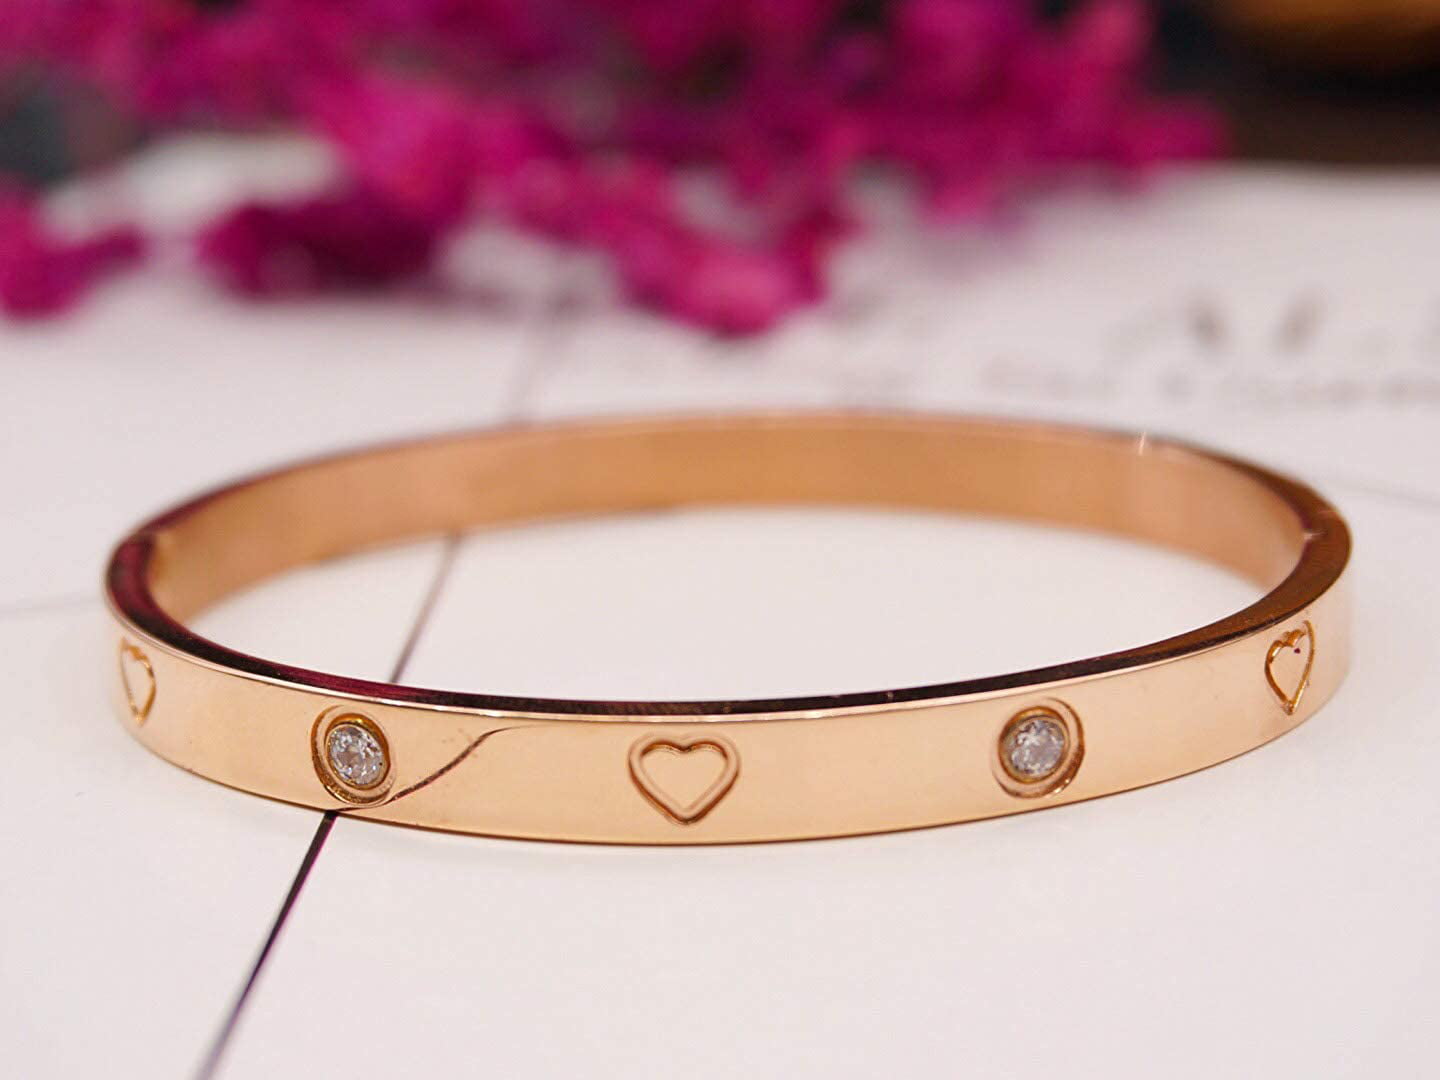 Bangle Gold Hoops Charms Jewelry Designers Valentines Day Gift 18K Gold  Plated Bracelet With Picture Inside Charm Bracelet Making Kit For Girls  Bracelet For Couples From Fashion9193, $13.39